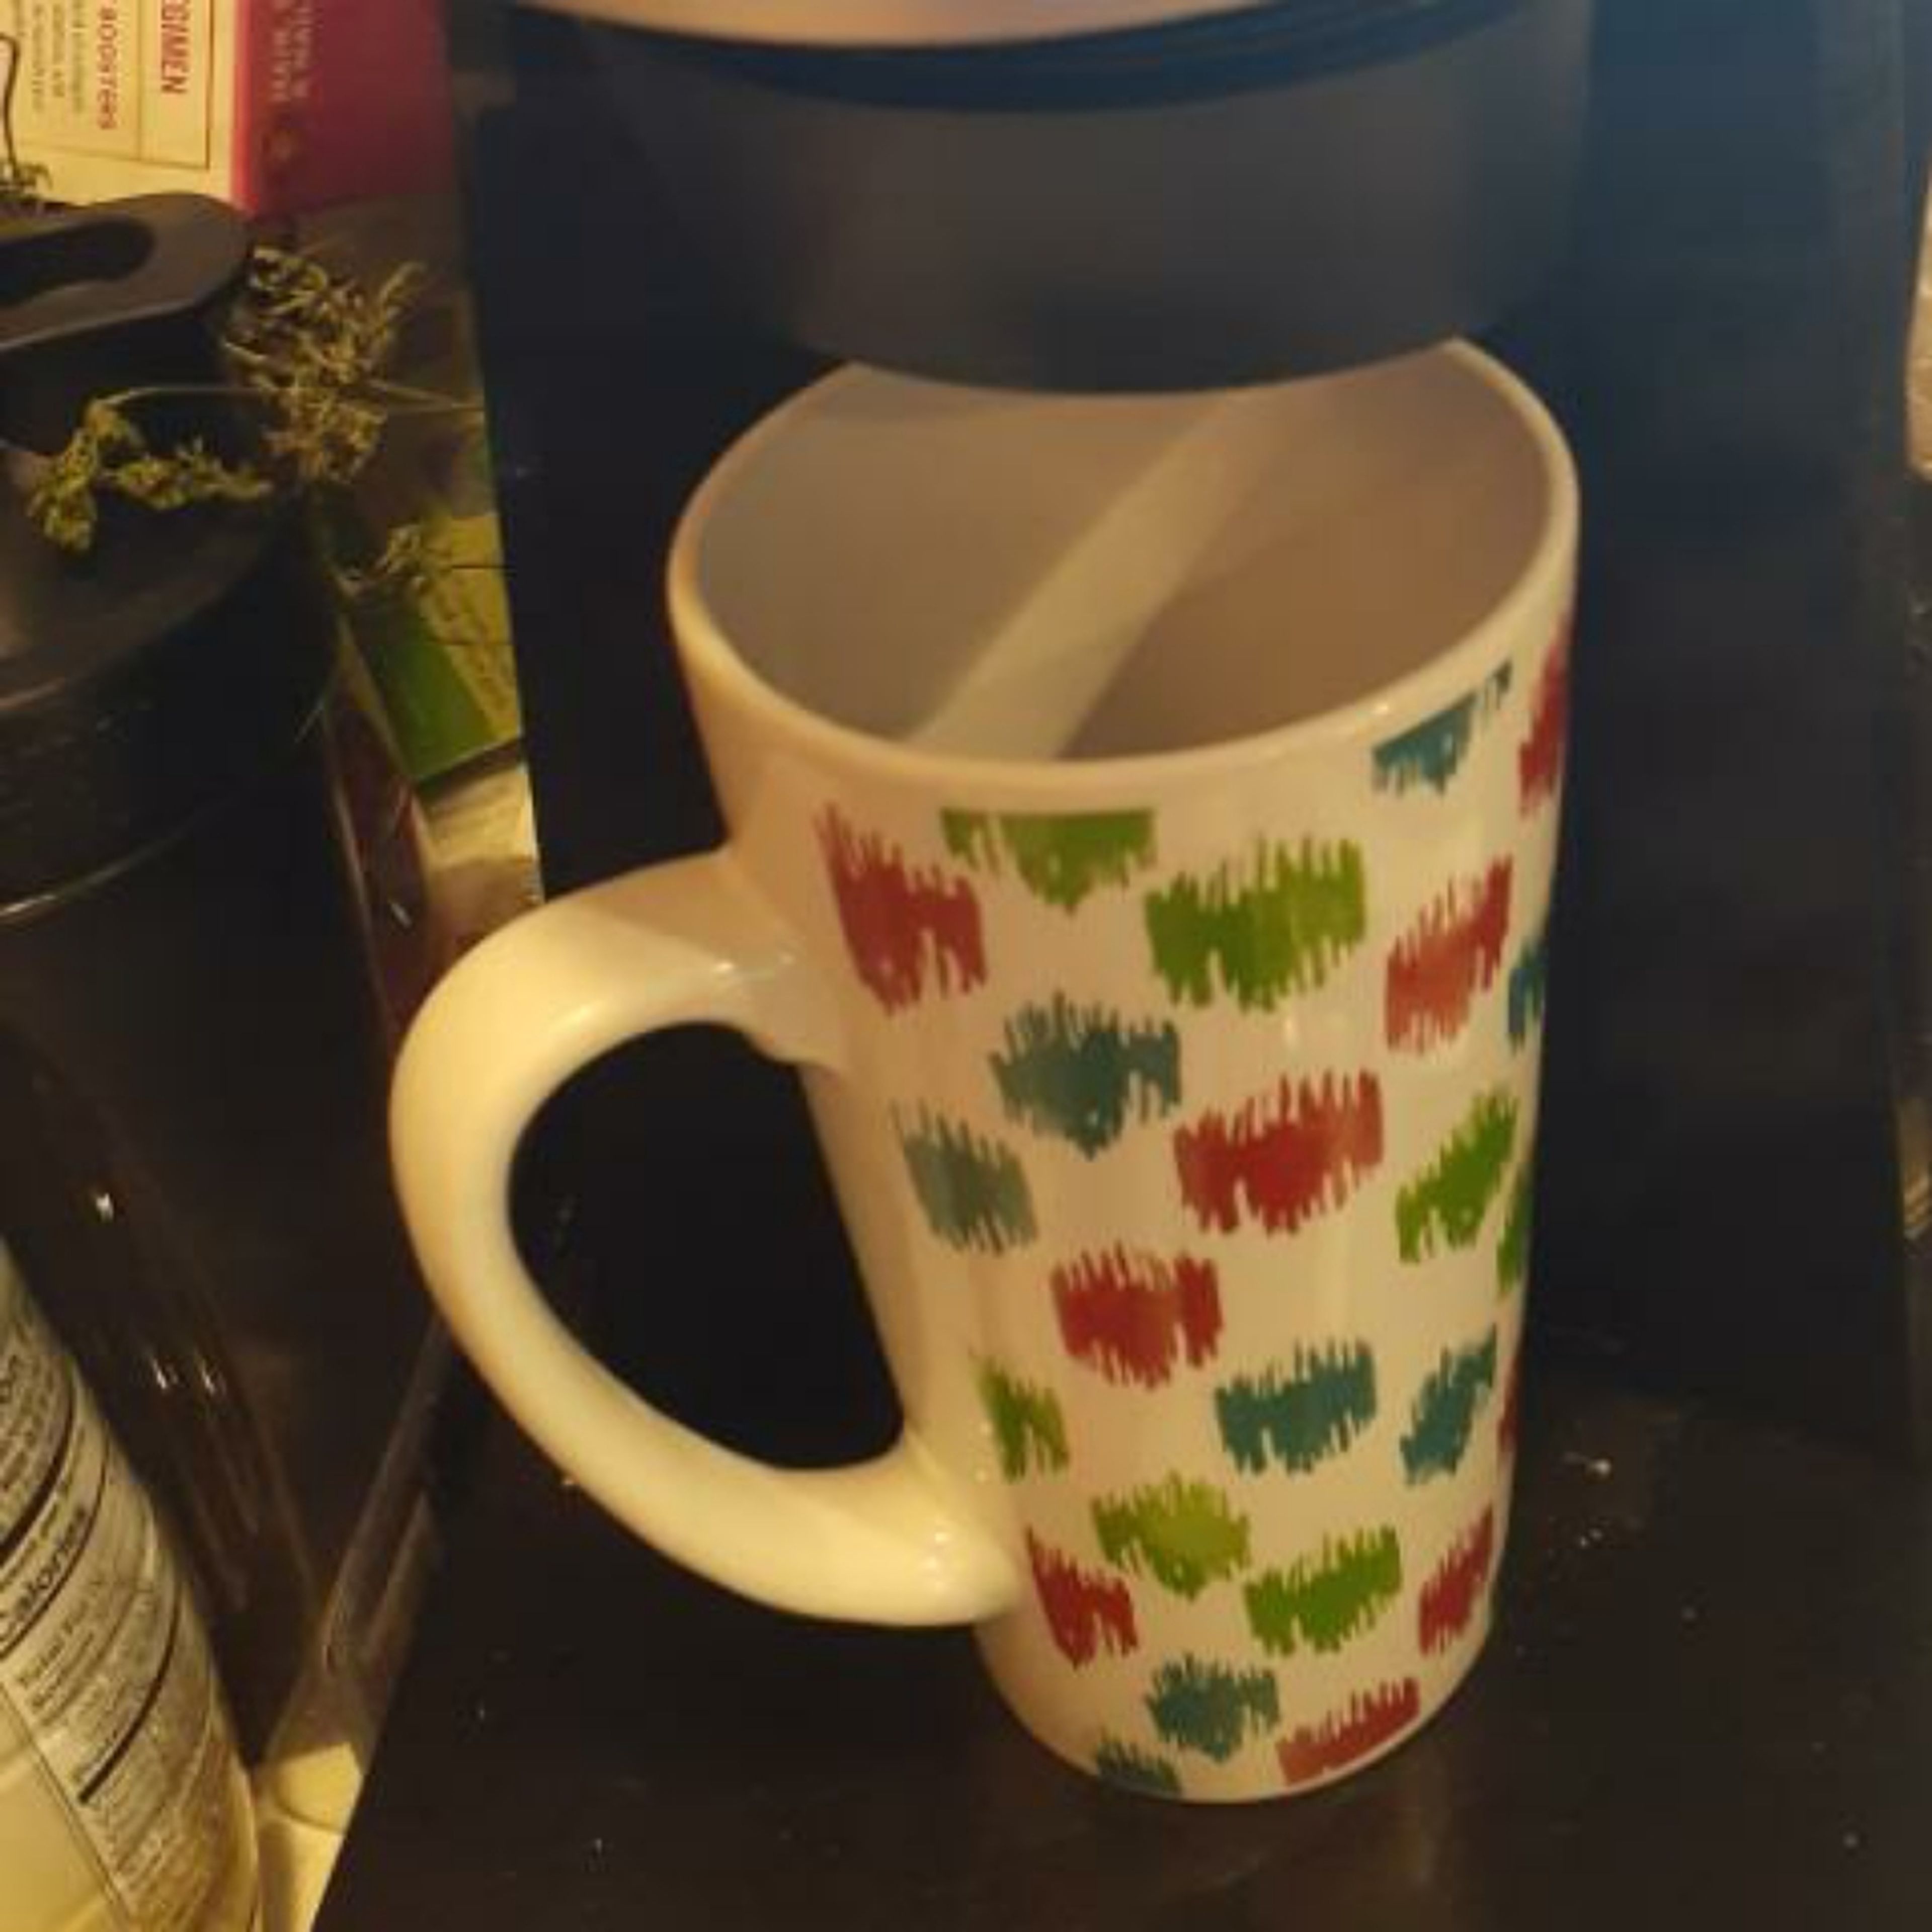 grab a mug and put it under the water dispenser. click on 10oz, and wait for it to preheat and fill the mug. dip the tea bag in the mug and let it steep for 10 minutes.